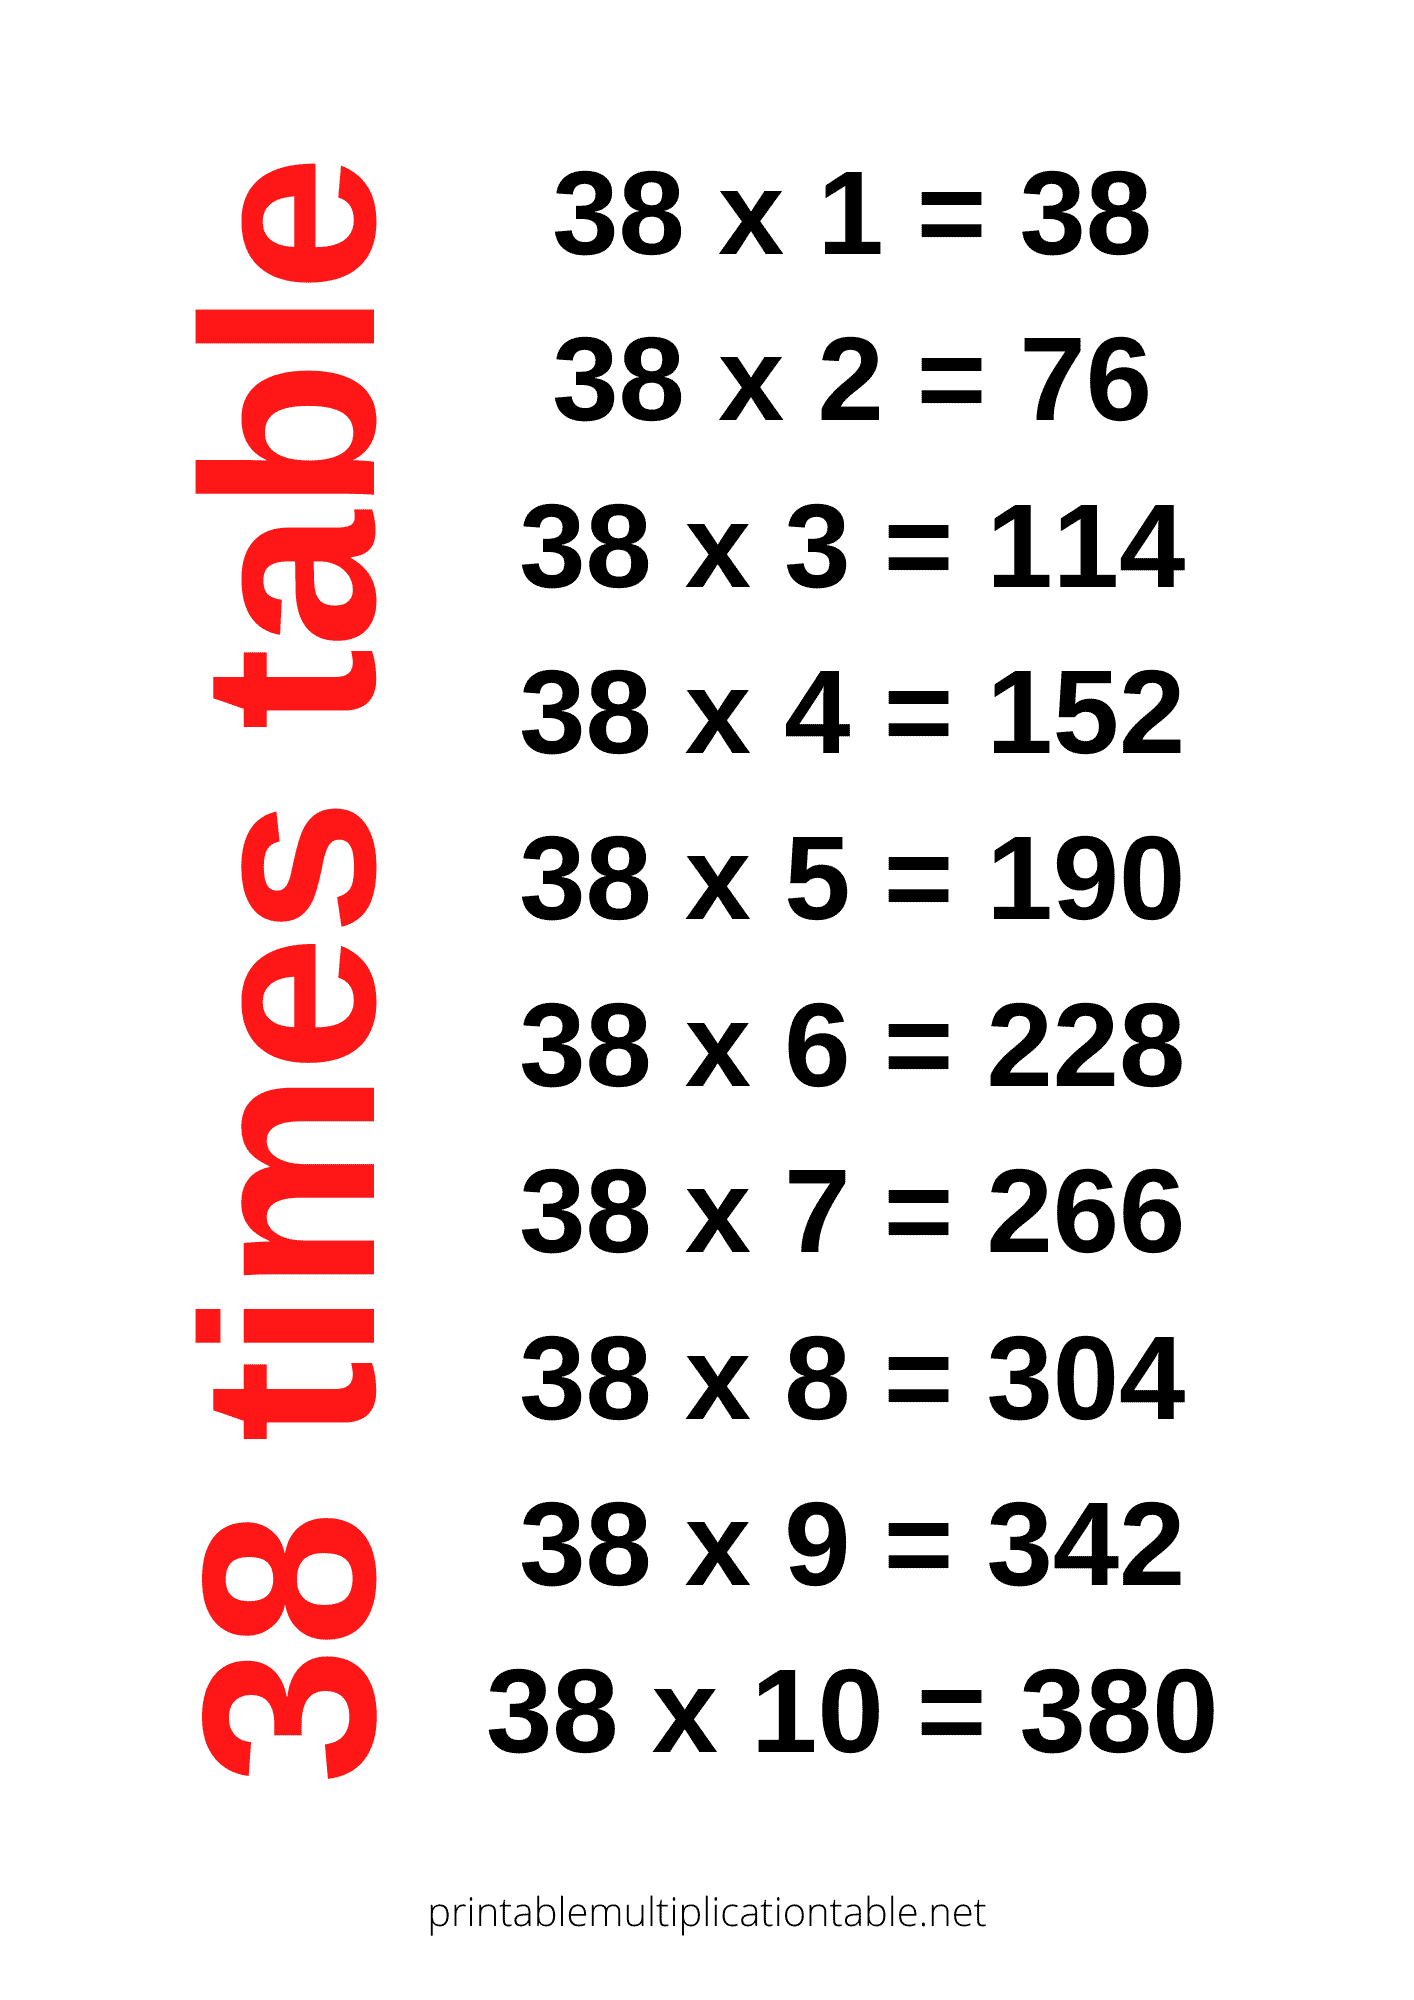 38 times table chart